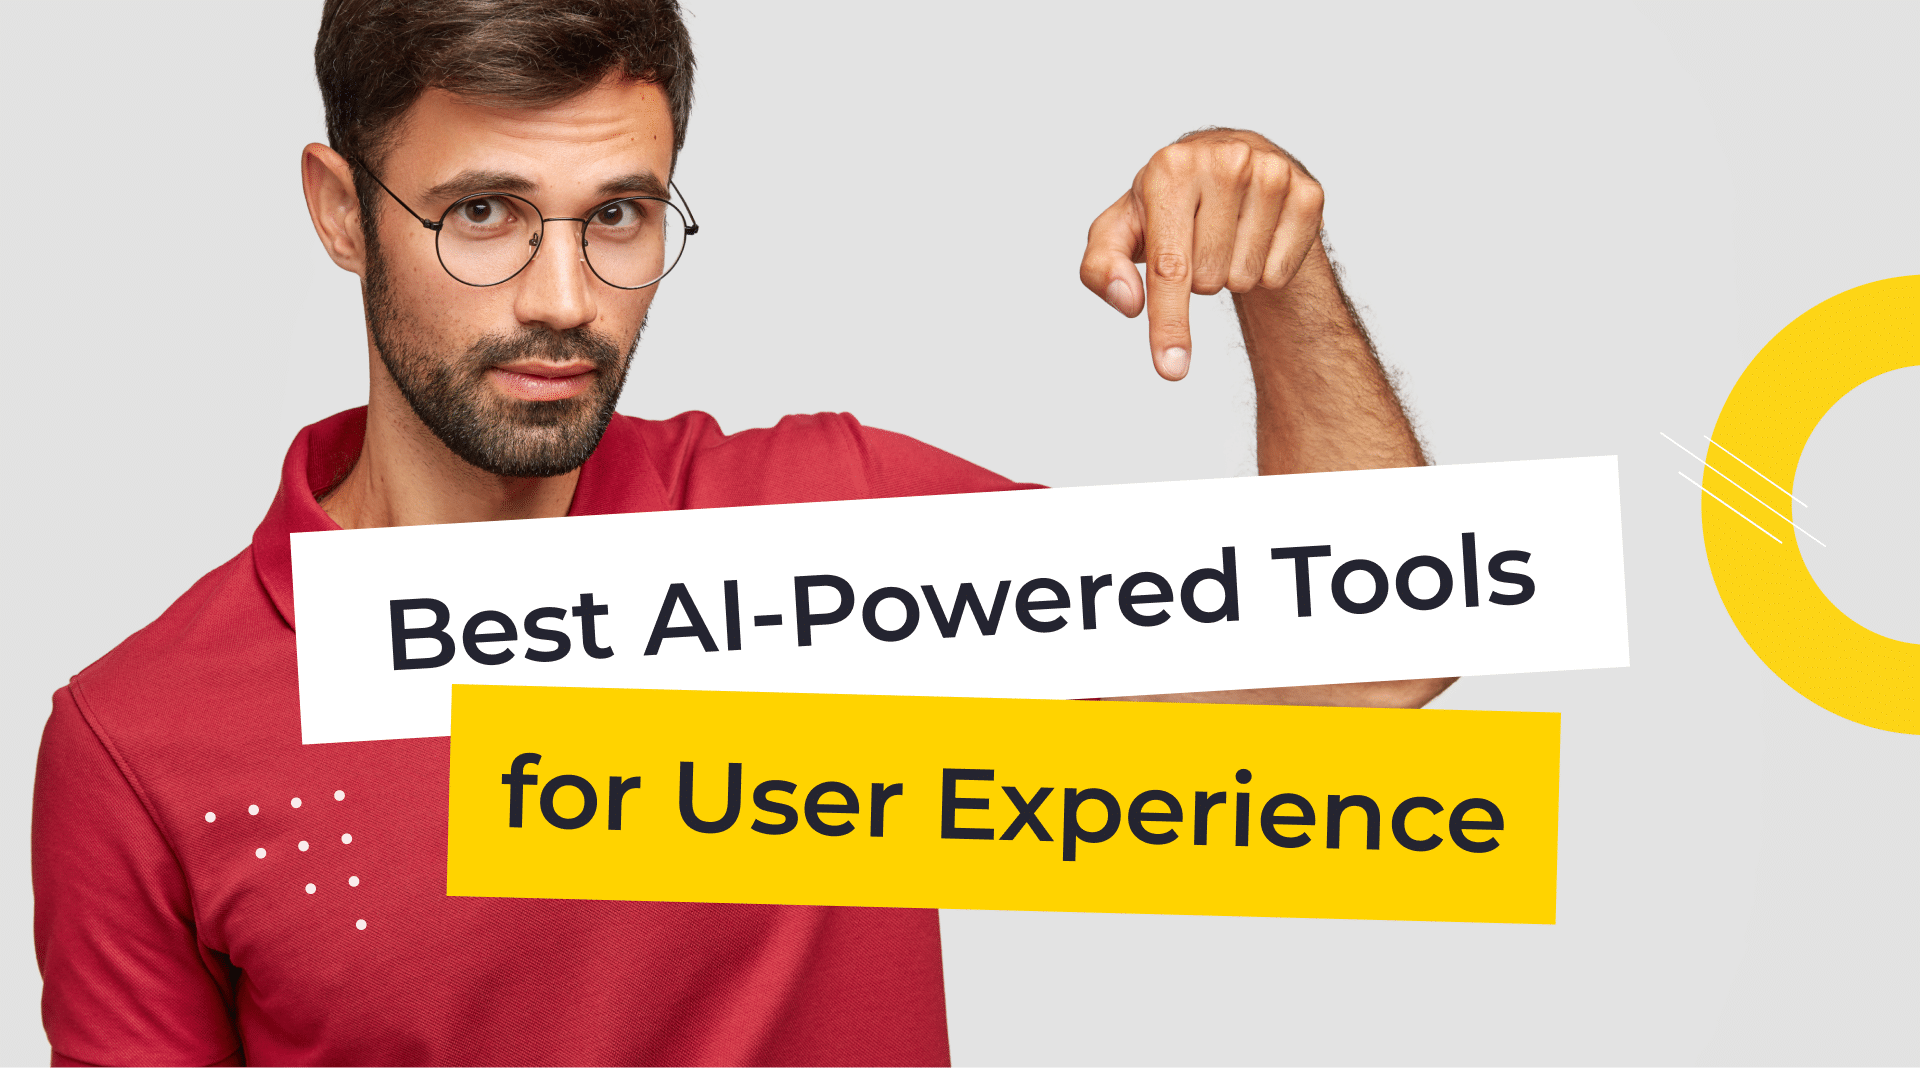 16 AI-Powered Tools To Improve Your User Experience And Sales